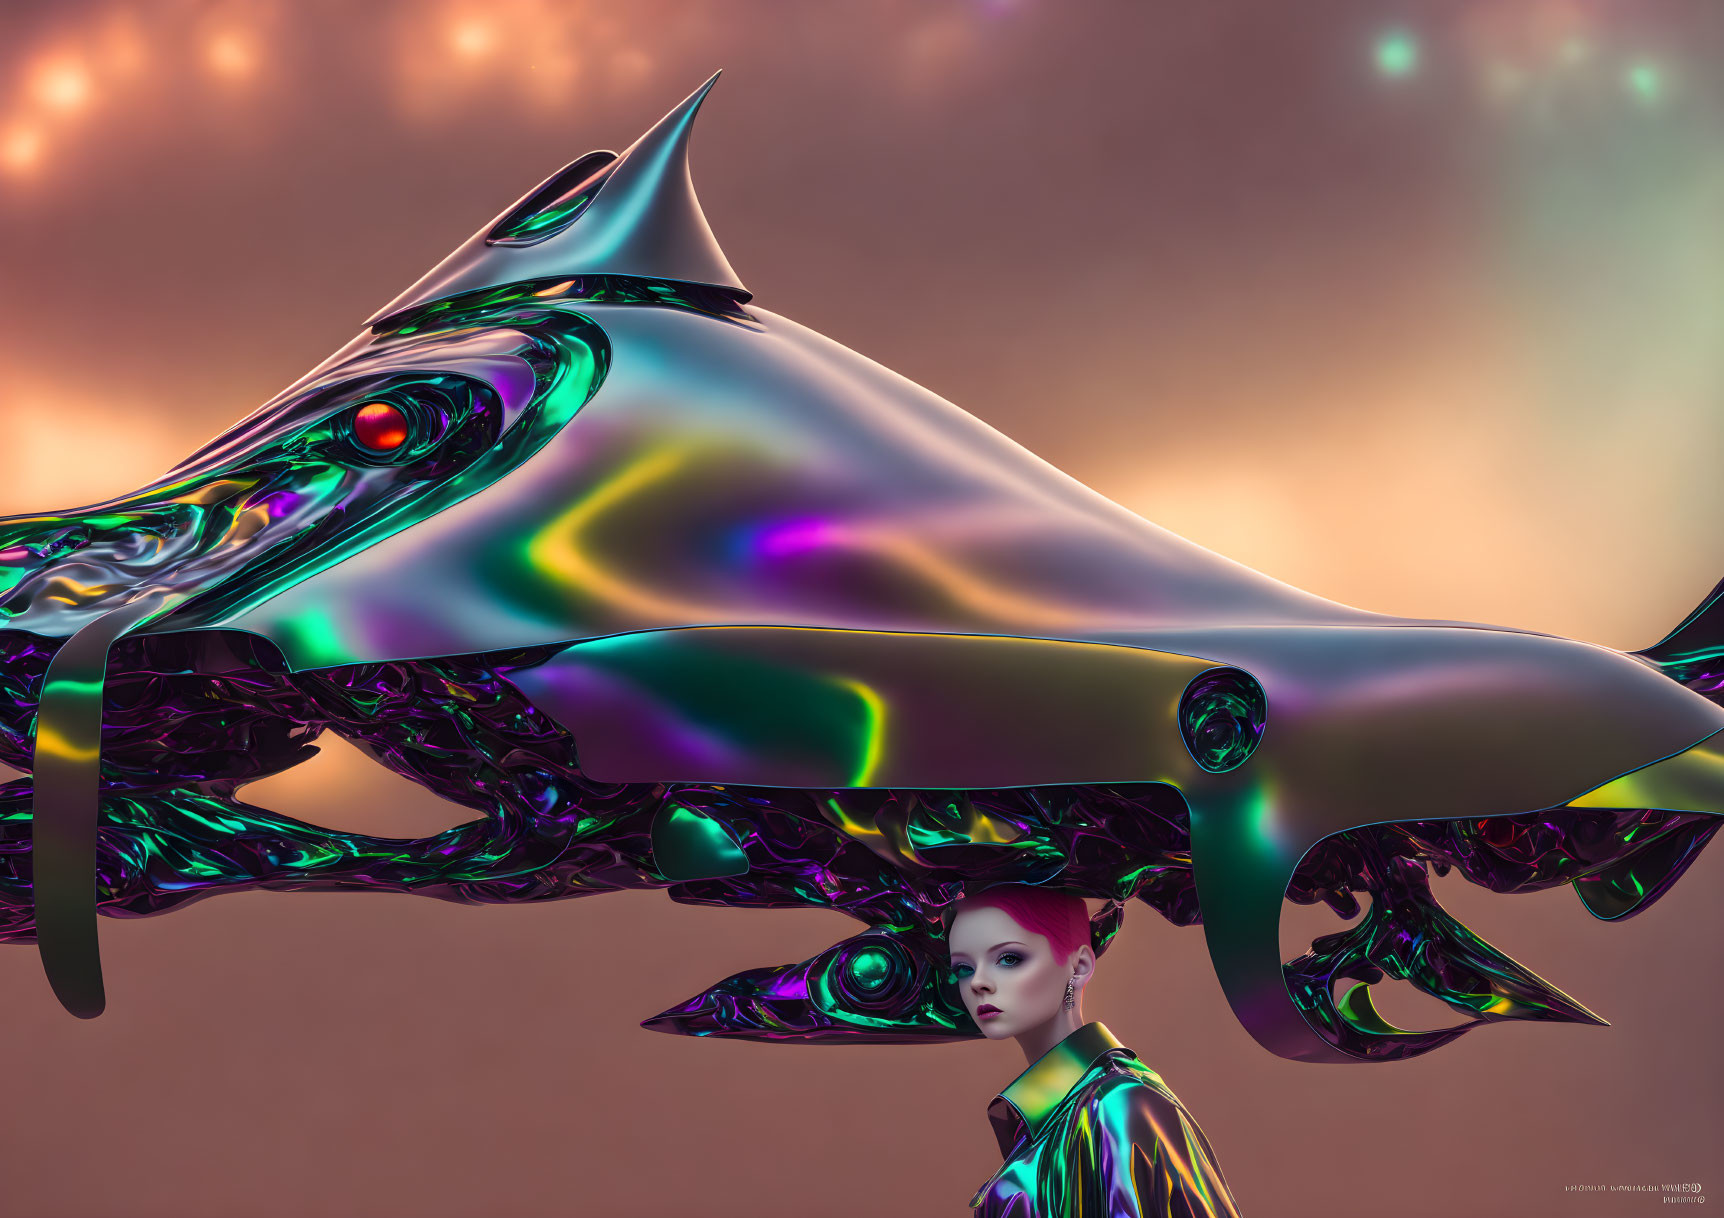 Futuristic image: Woman's face merges with metallic dolphin structure